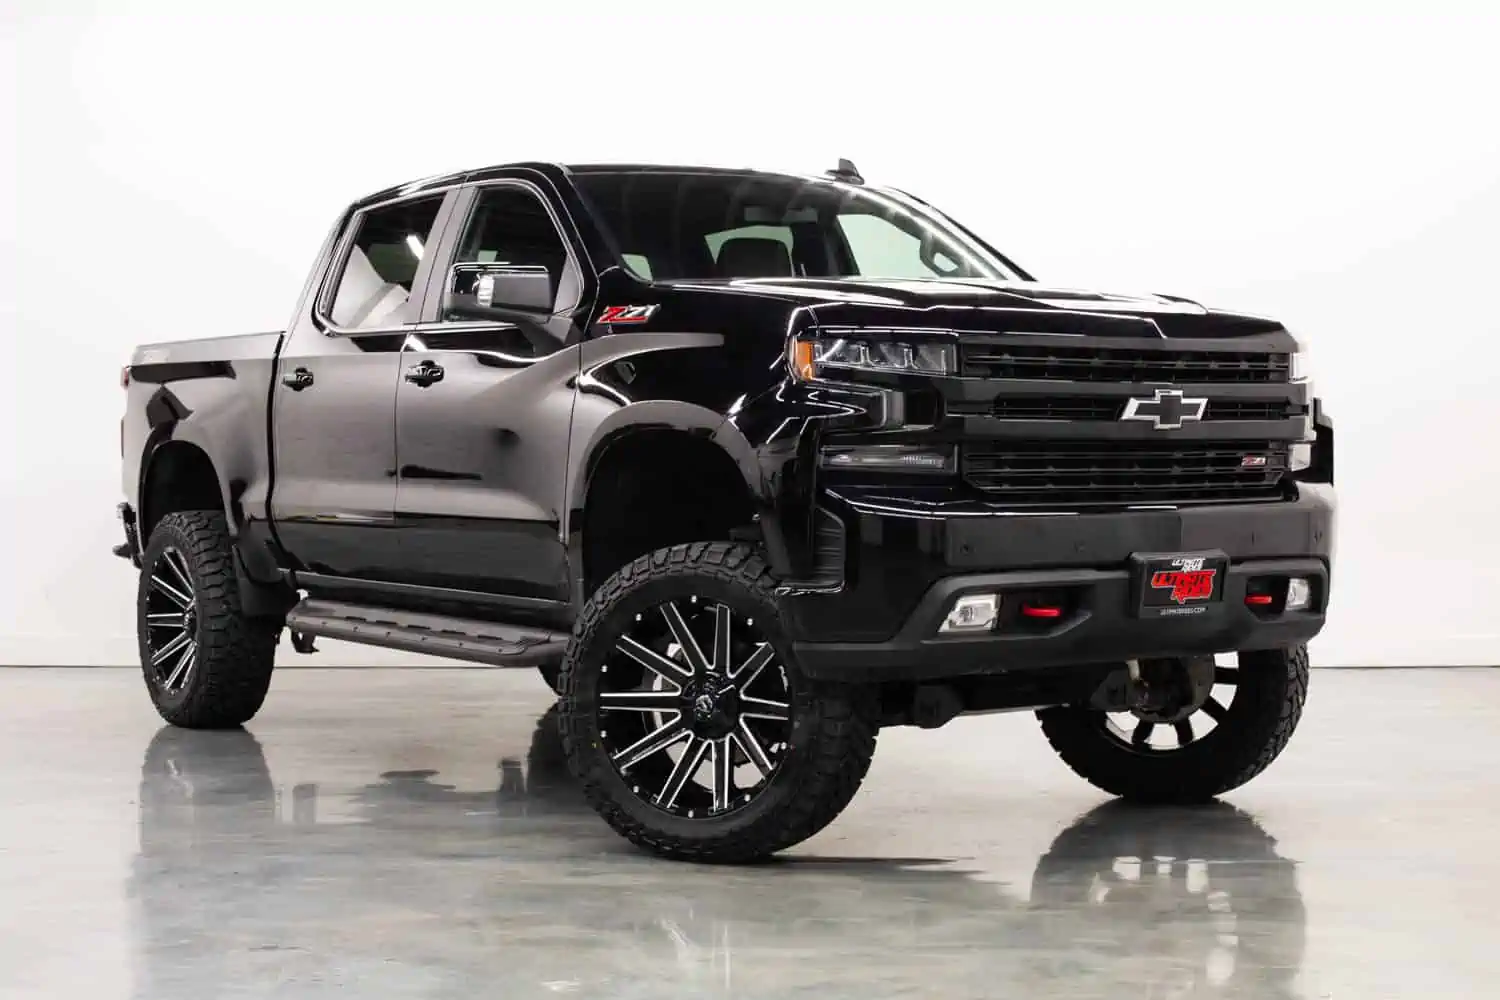 Lifted Trucks for Sale in North Carolina